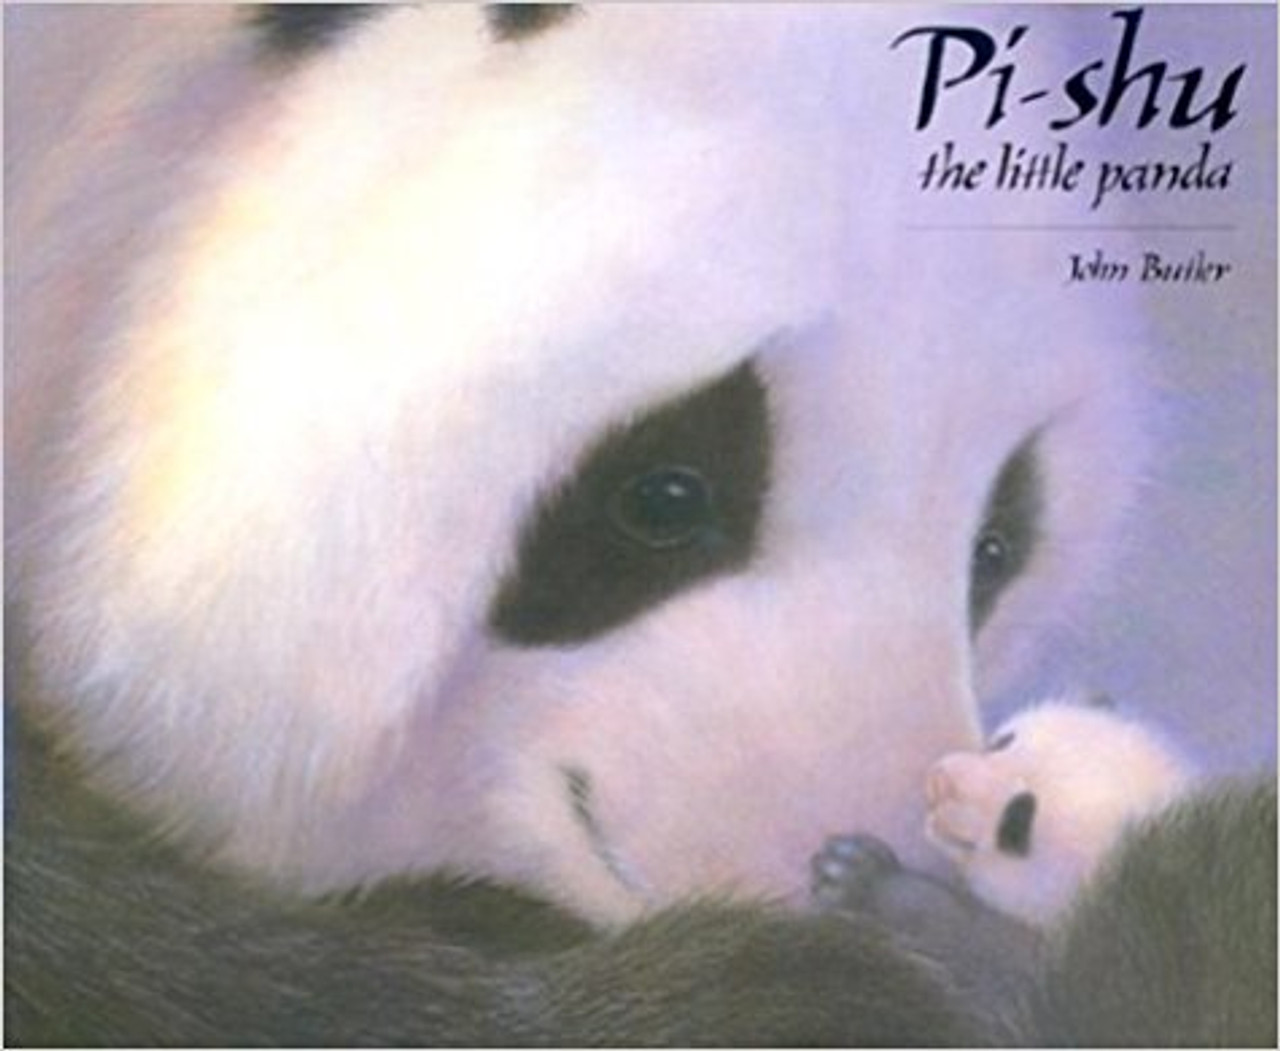 A heartwarming story about a small panda whose home is threatened by the encroachment of humans.